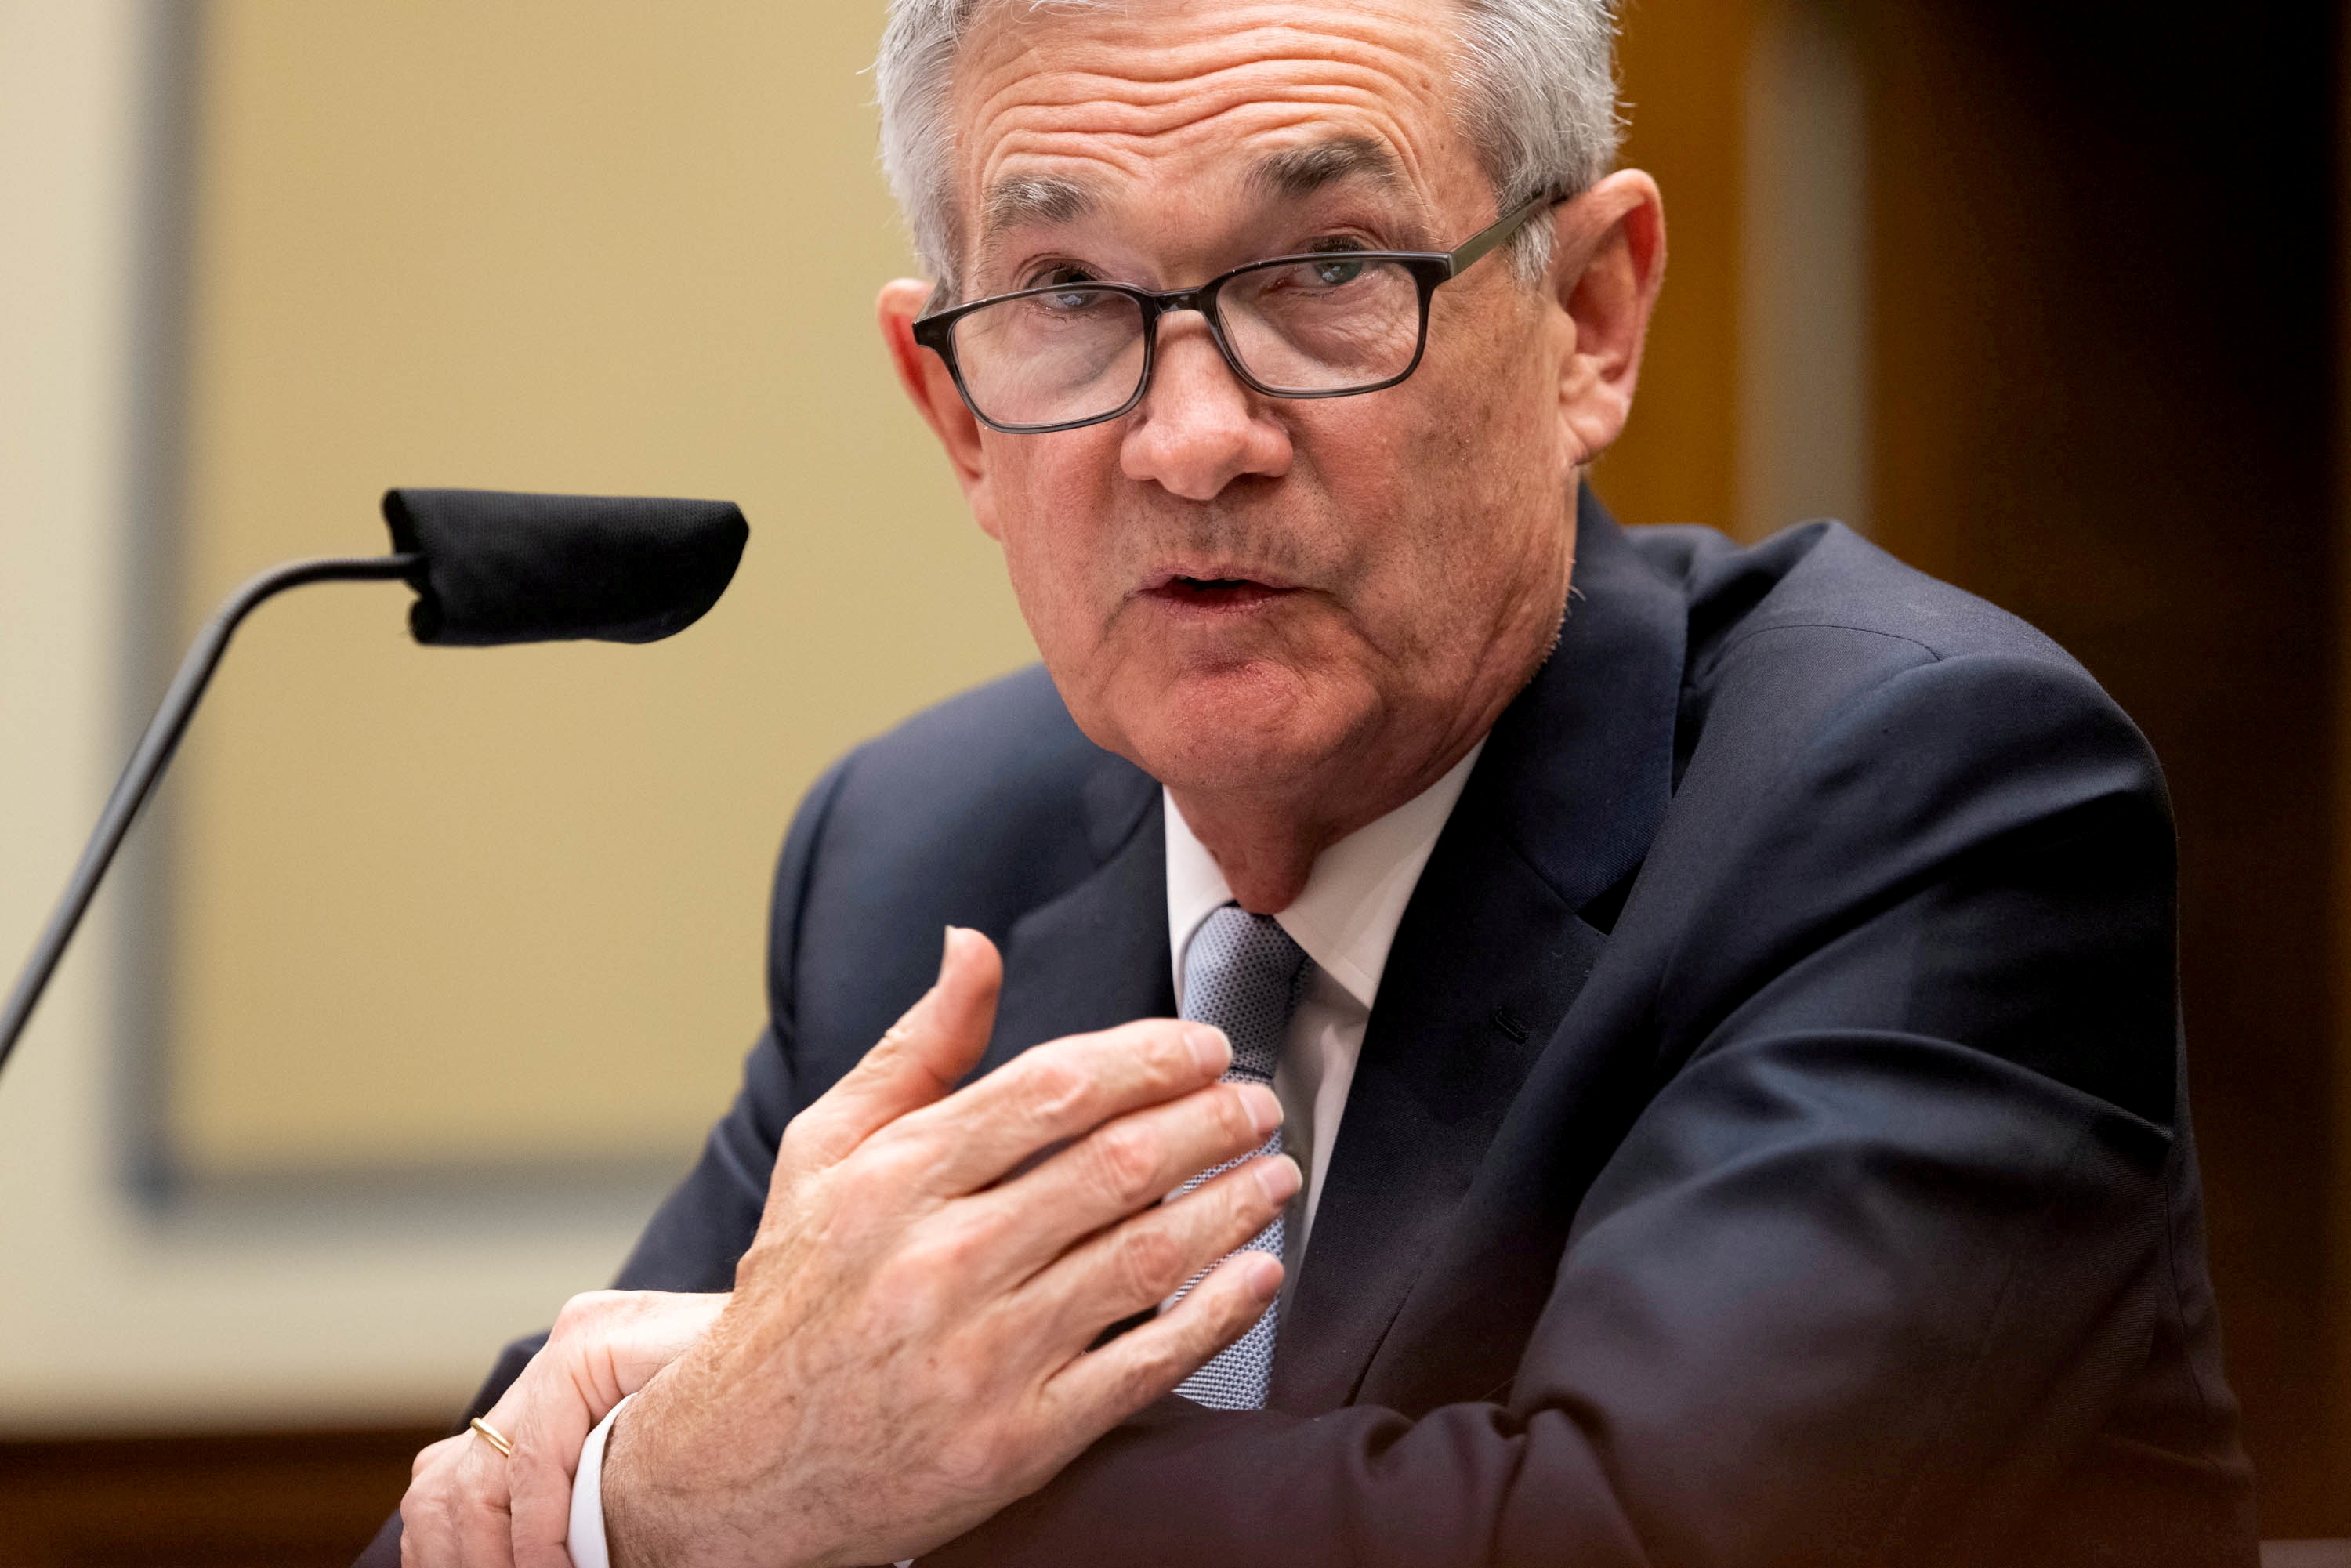 Federal Reserve Chair Powell testifies on Capitol Hill in Washington